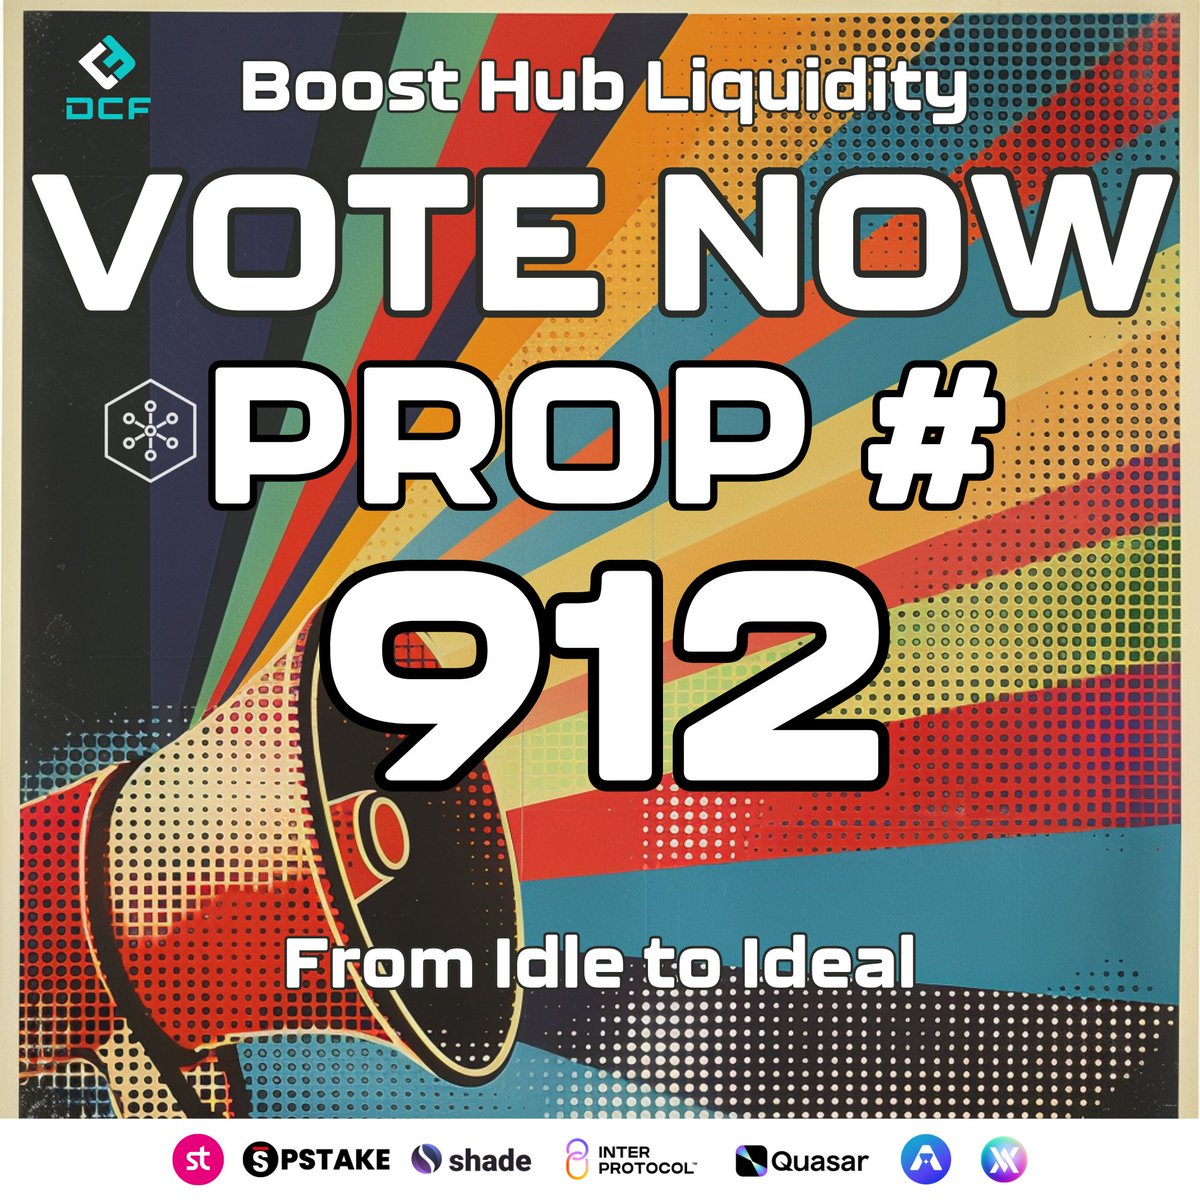 🚨Prop #912 is set to unlock new levels of liquidity across the @cosmos. Voting is live. Get over and cast your vote now. Need more info on why the proposal is a win-win-win? Let's have a review. 👇 @DCF_io @cosmoshub Prop #912 is the spending proposal followup to signaling